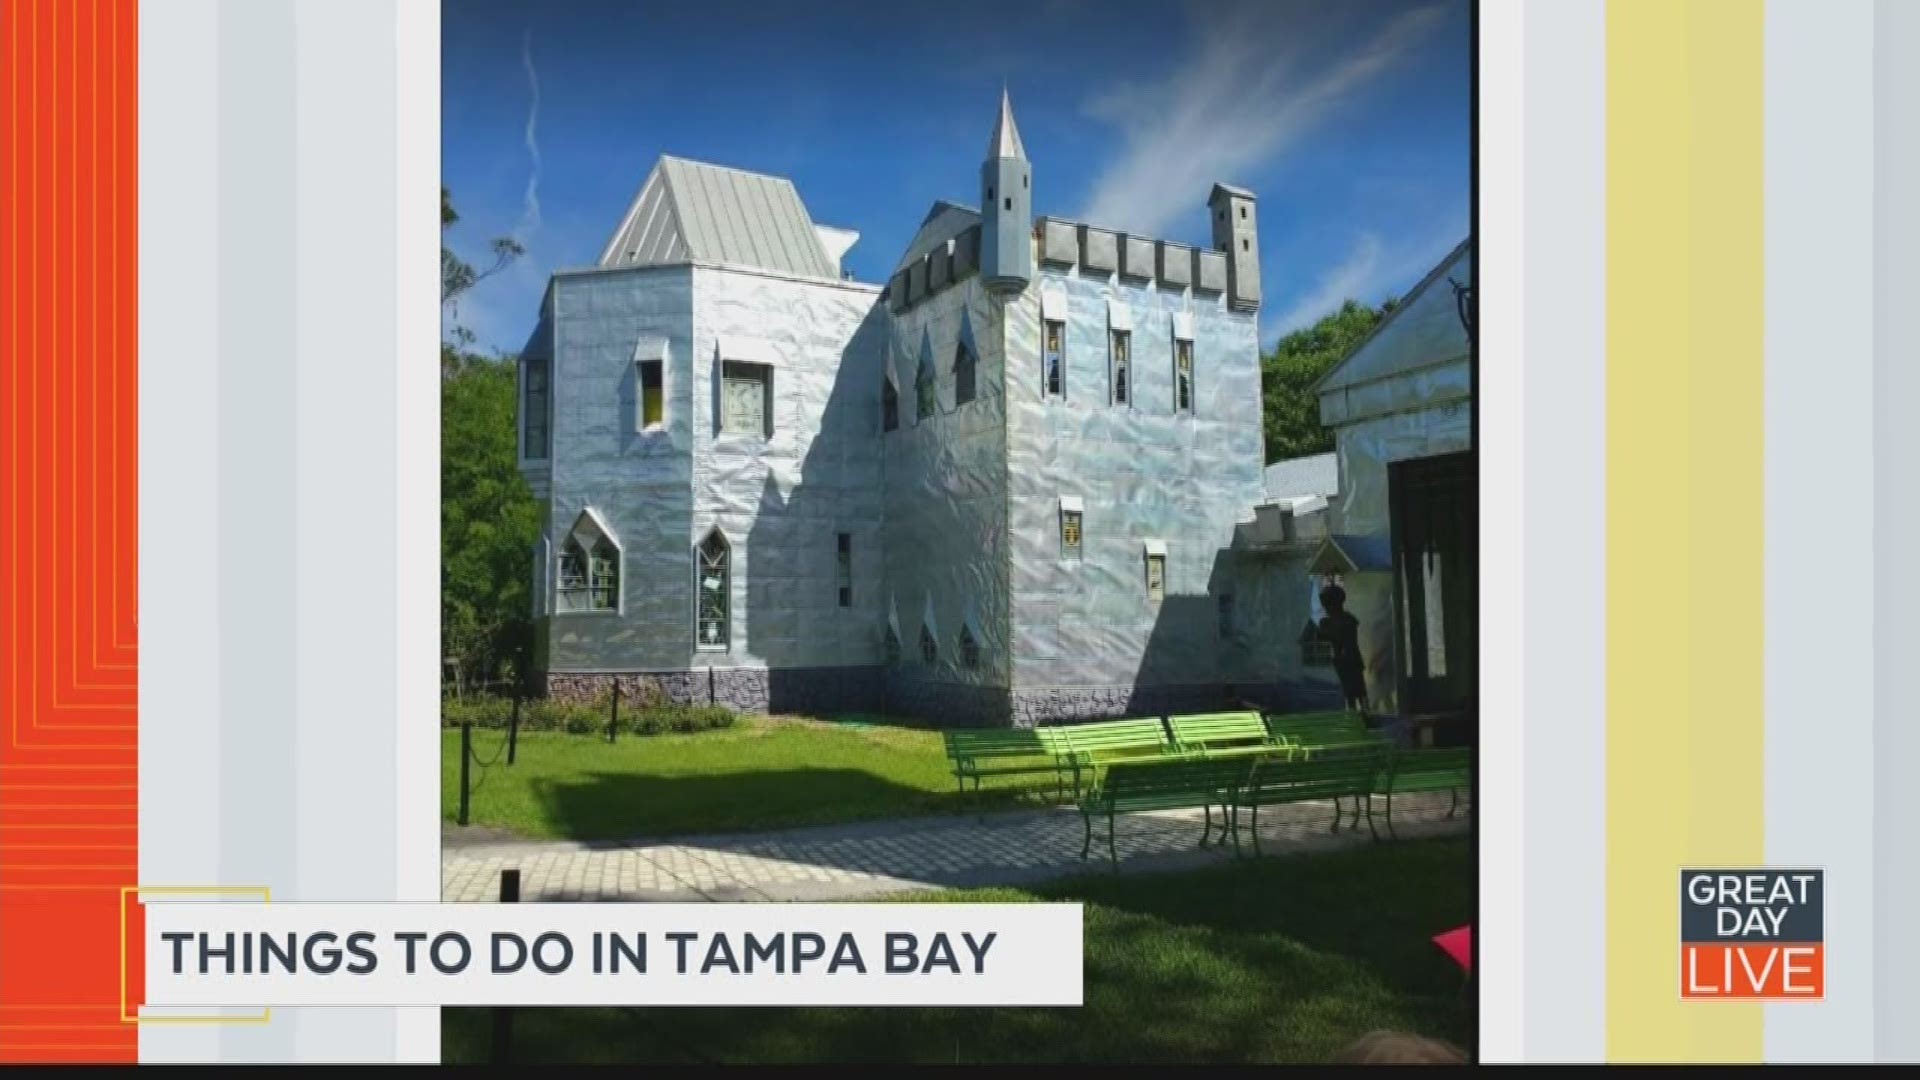 You don't need a reason to come to Tampa Bay. We have beautiful beaches, aquariums, theme parks, and miles of outdoors to explore. But, as 100 Things to Do in Tampa Bay Before You Die will show you, there's plenty more to do in Tampa than the obvious.